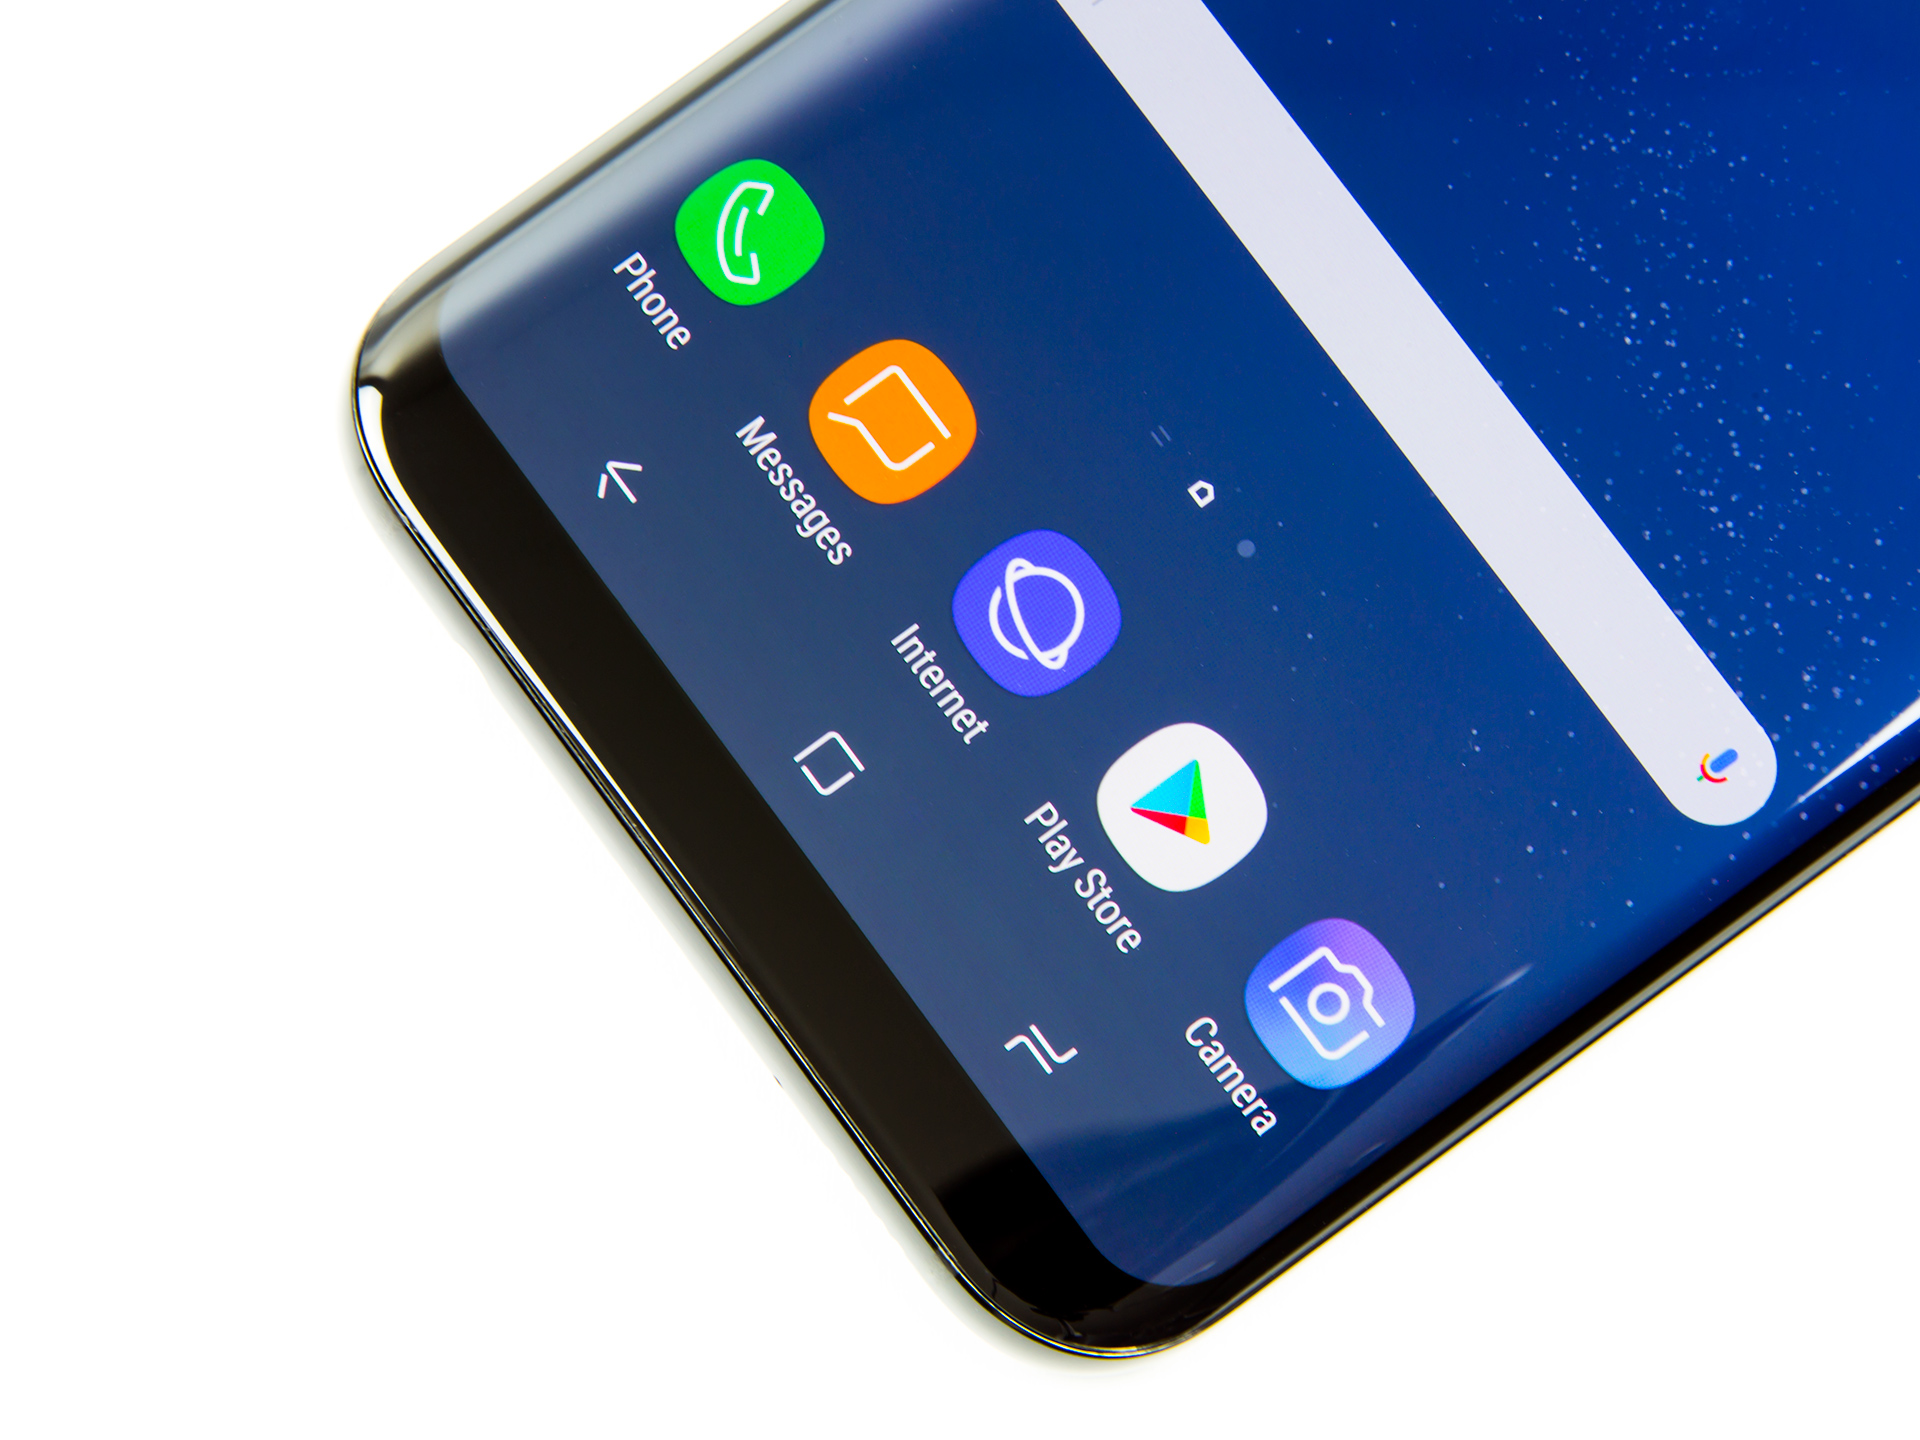 Galaxy S8 review: Gorgeous new hardware, same Samsung gimmicks | Ars Technica1920 x 1440